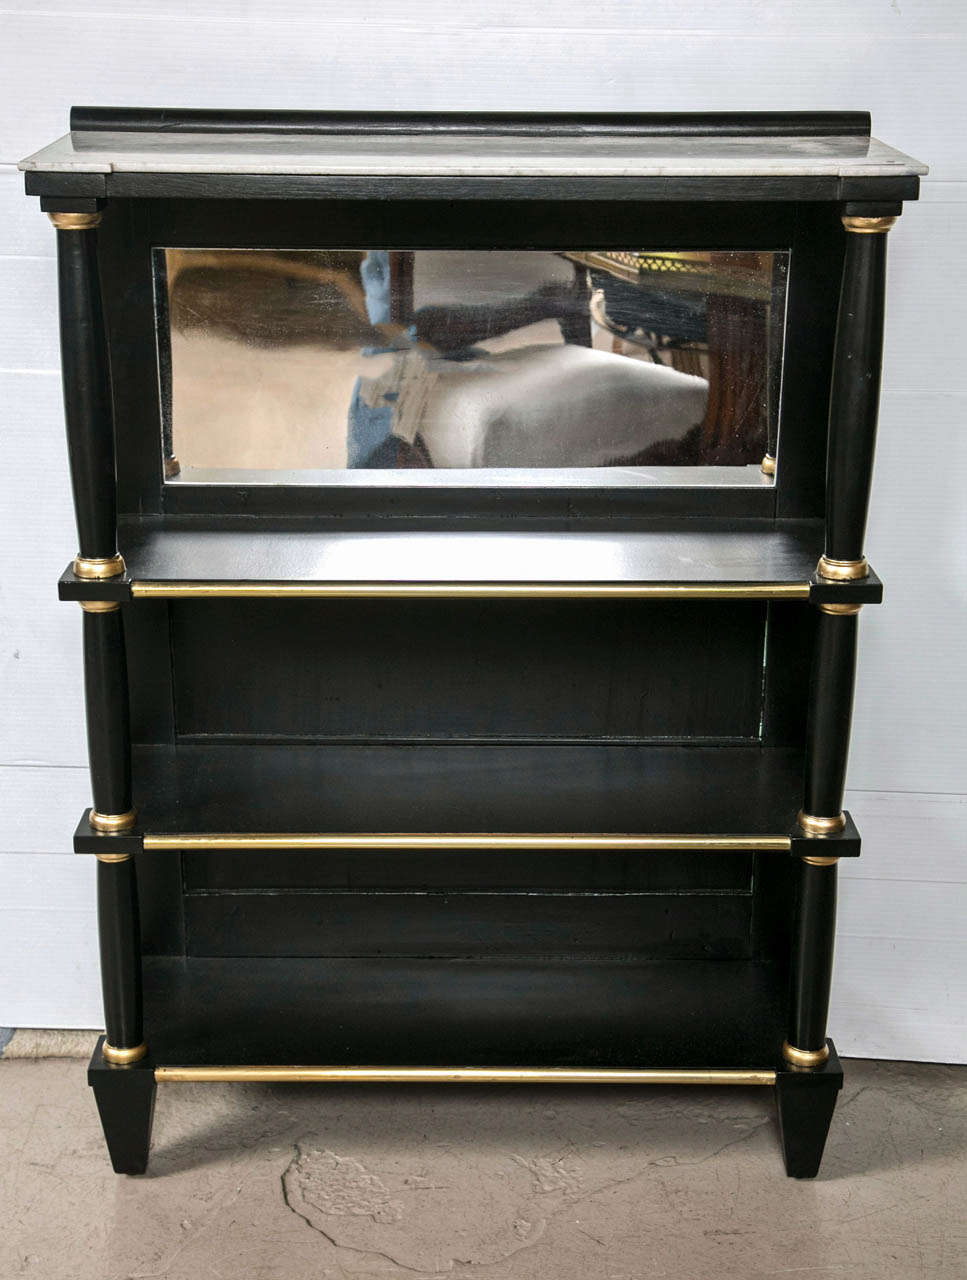 A pair of Marble top Bookcase cabinets or shelving units by Maison Jansen. Each ebonized and gilt gold hi lighted cabinet with a square tapering leg leading to a set of four shelves all flanked by circular columns. The upper shelving area with a